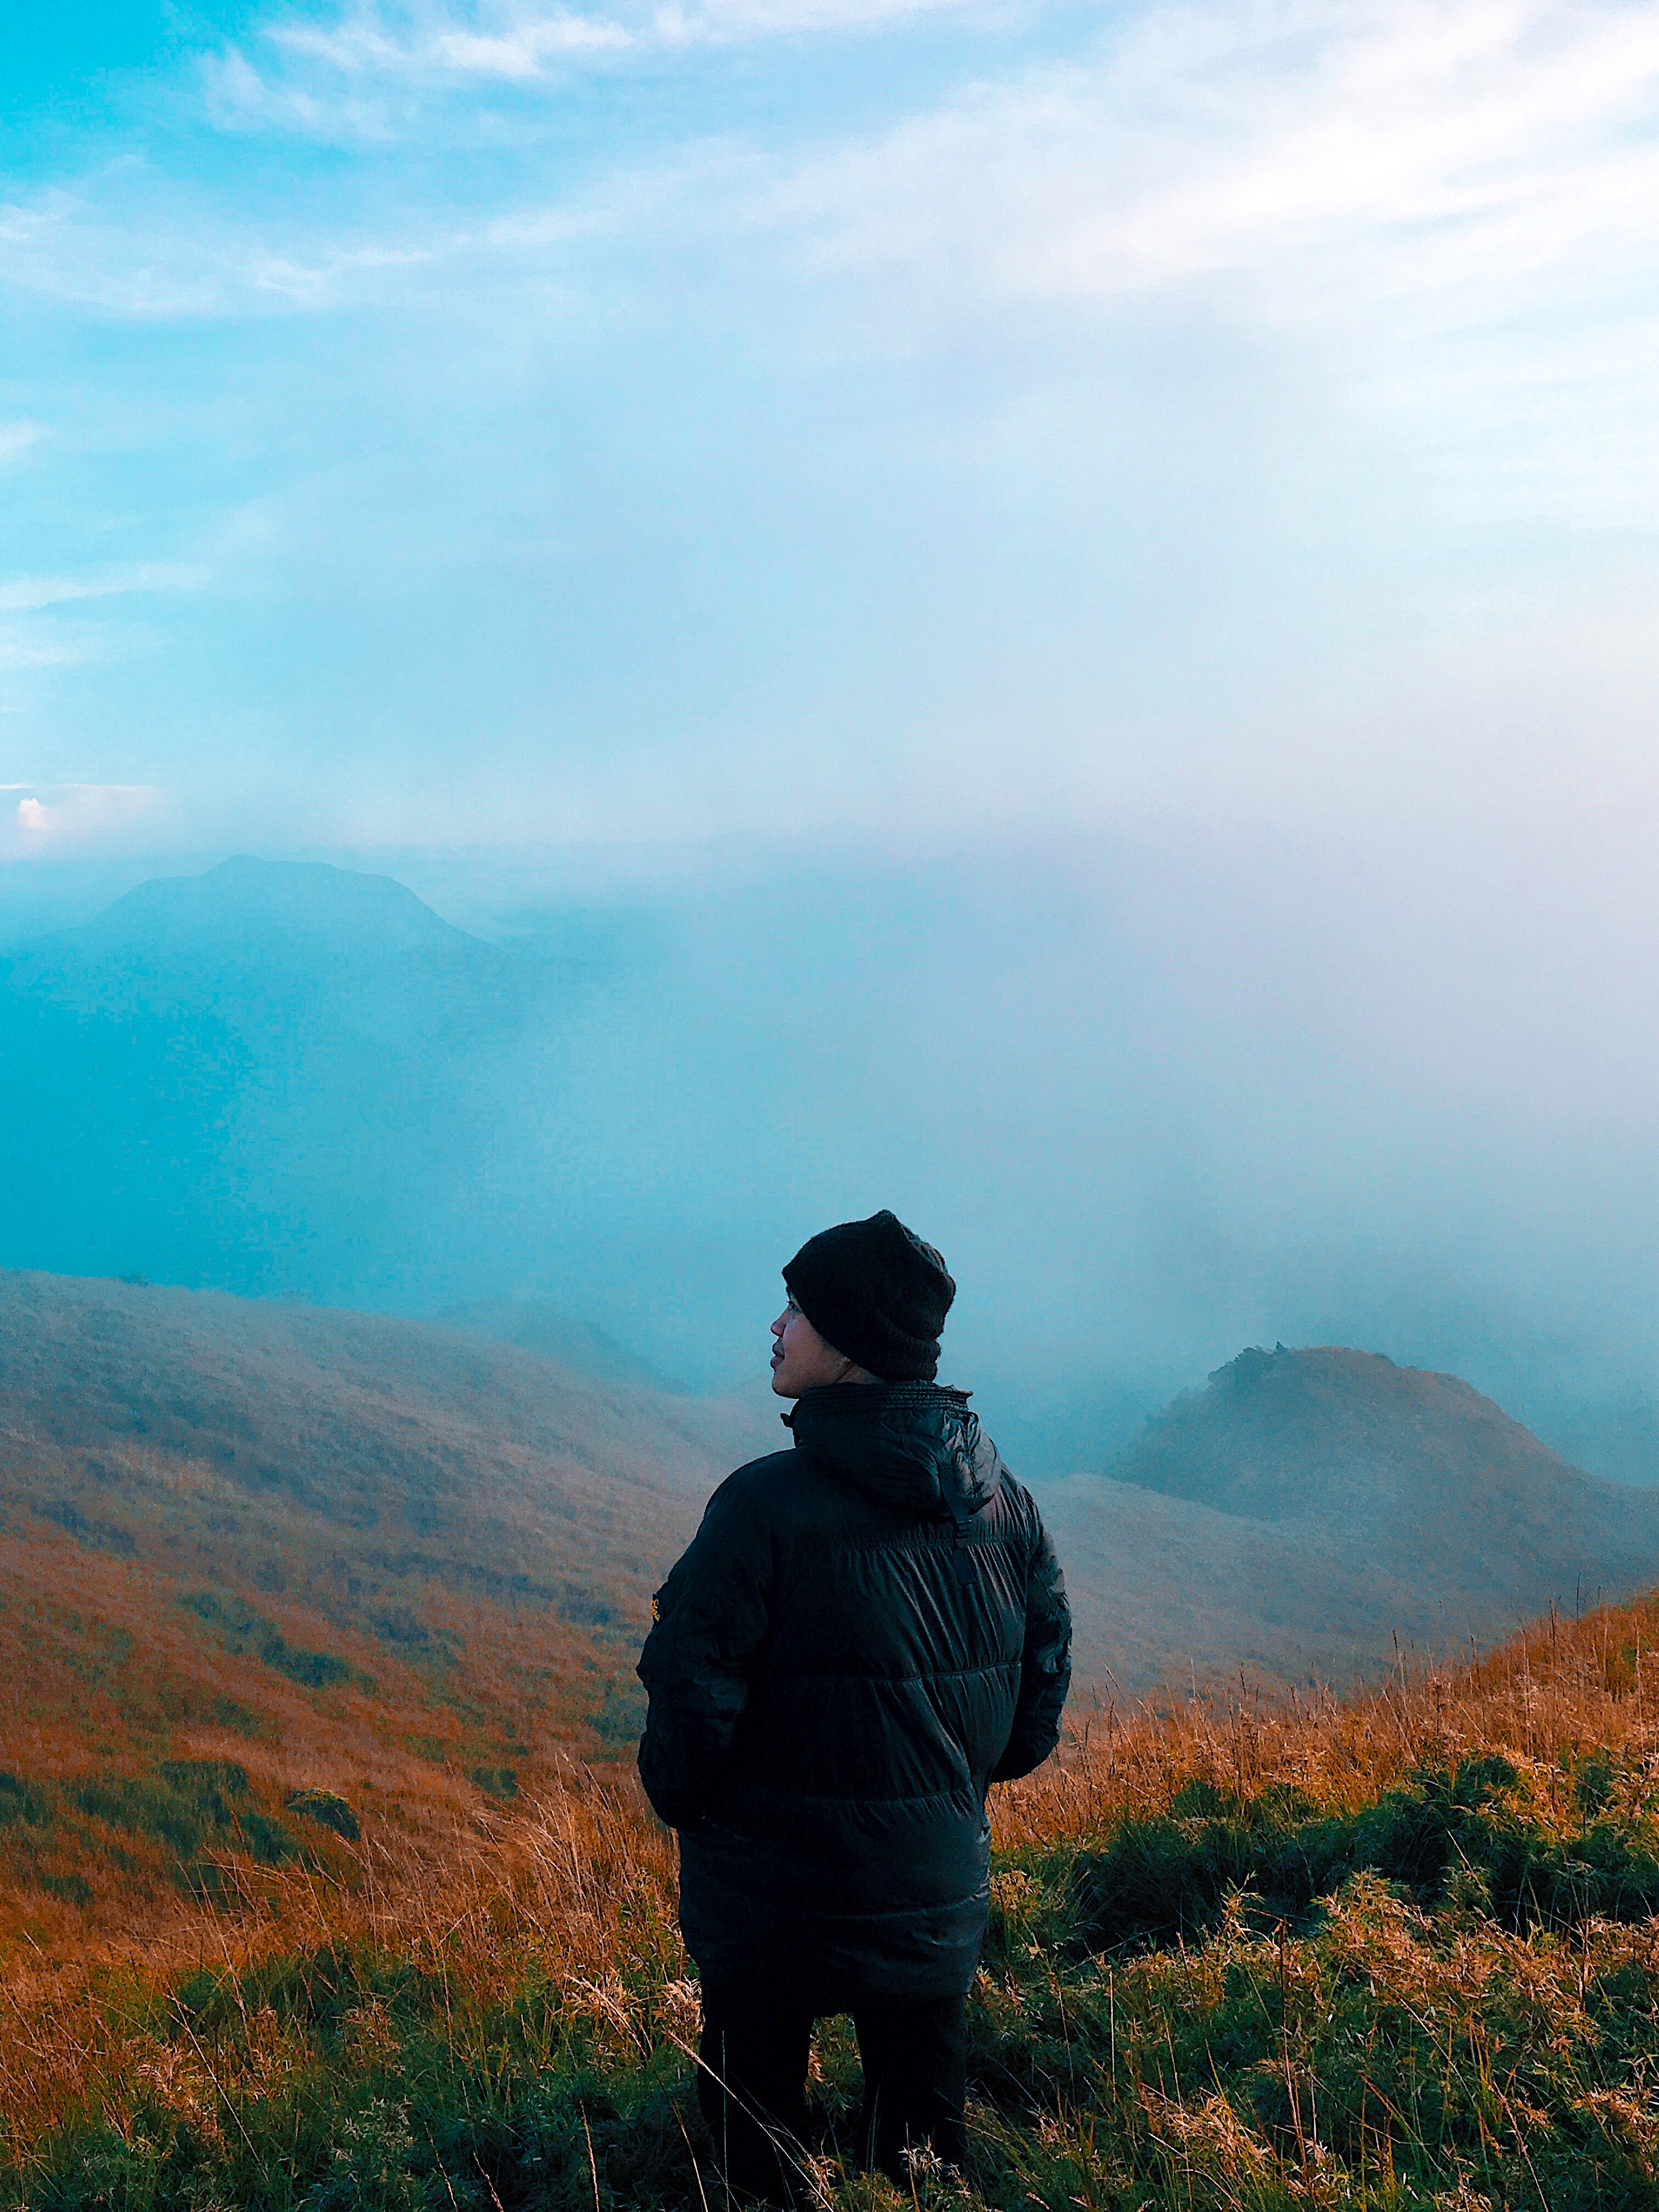 Man in black jacket standing on mountain with fog photo